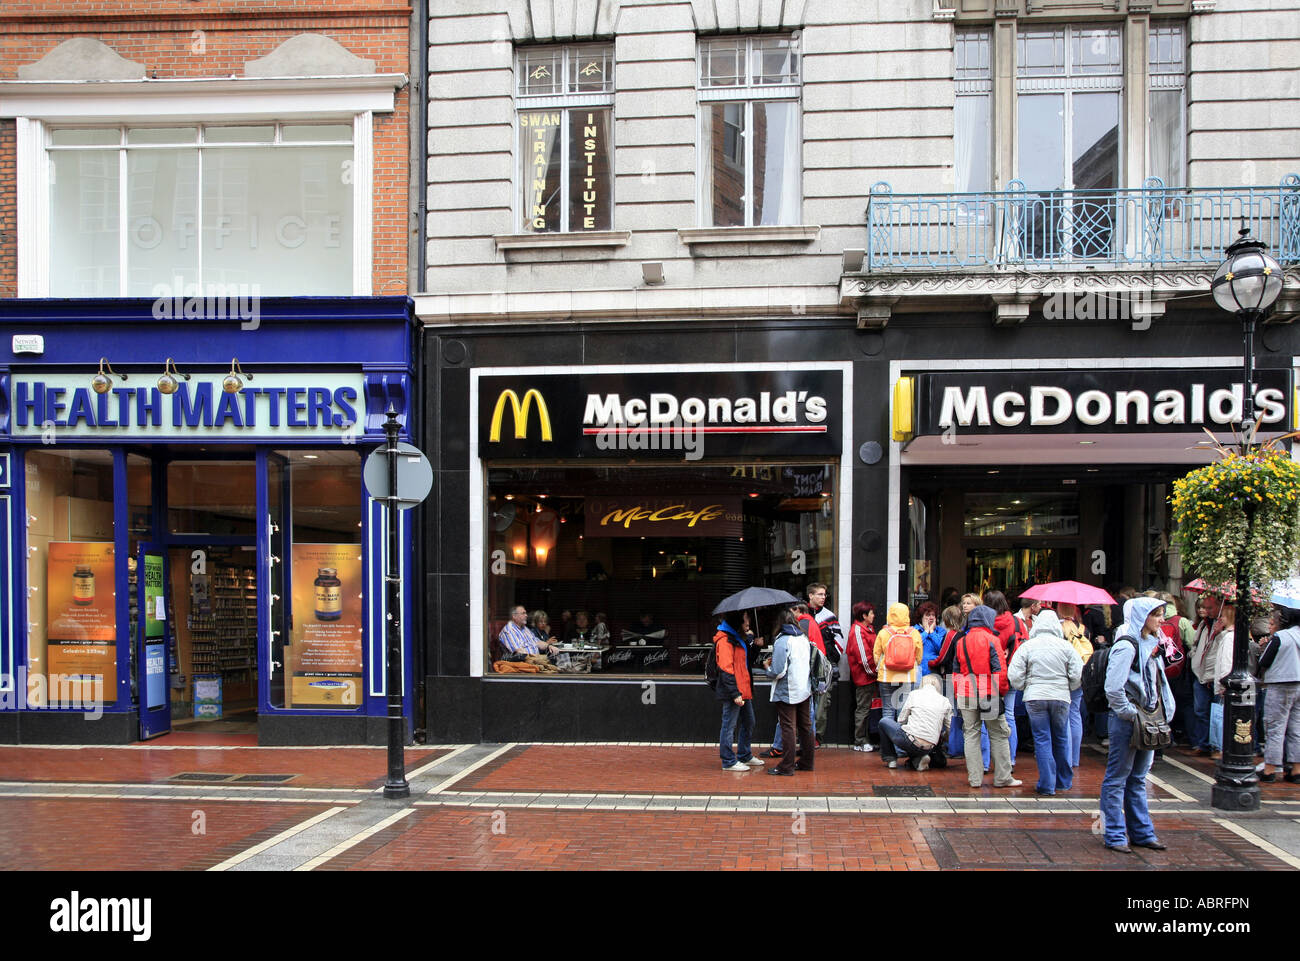 People queueing for Macdonalds burgers next to health food shop Stock Photo